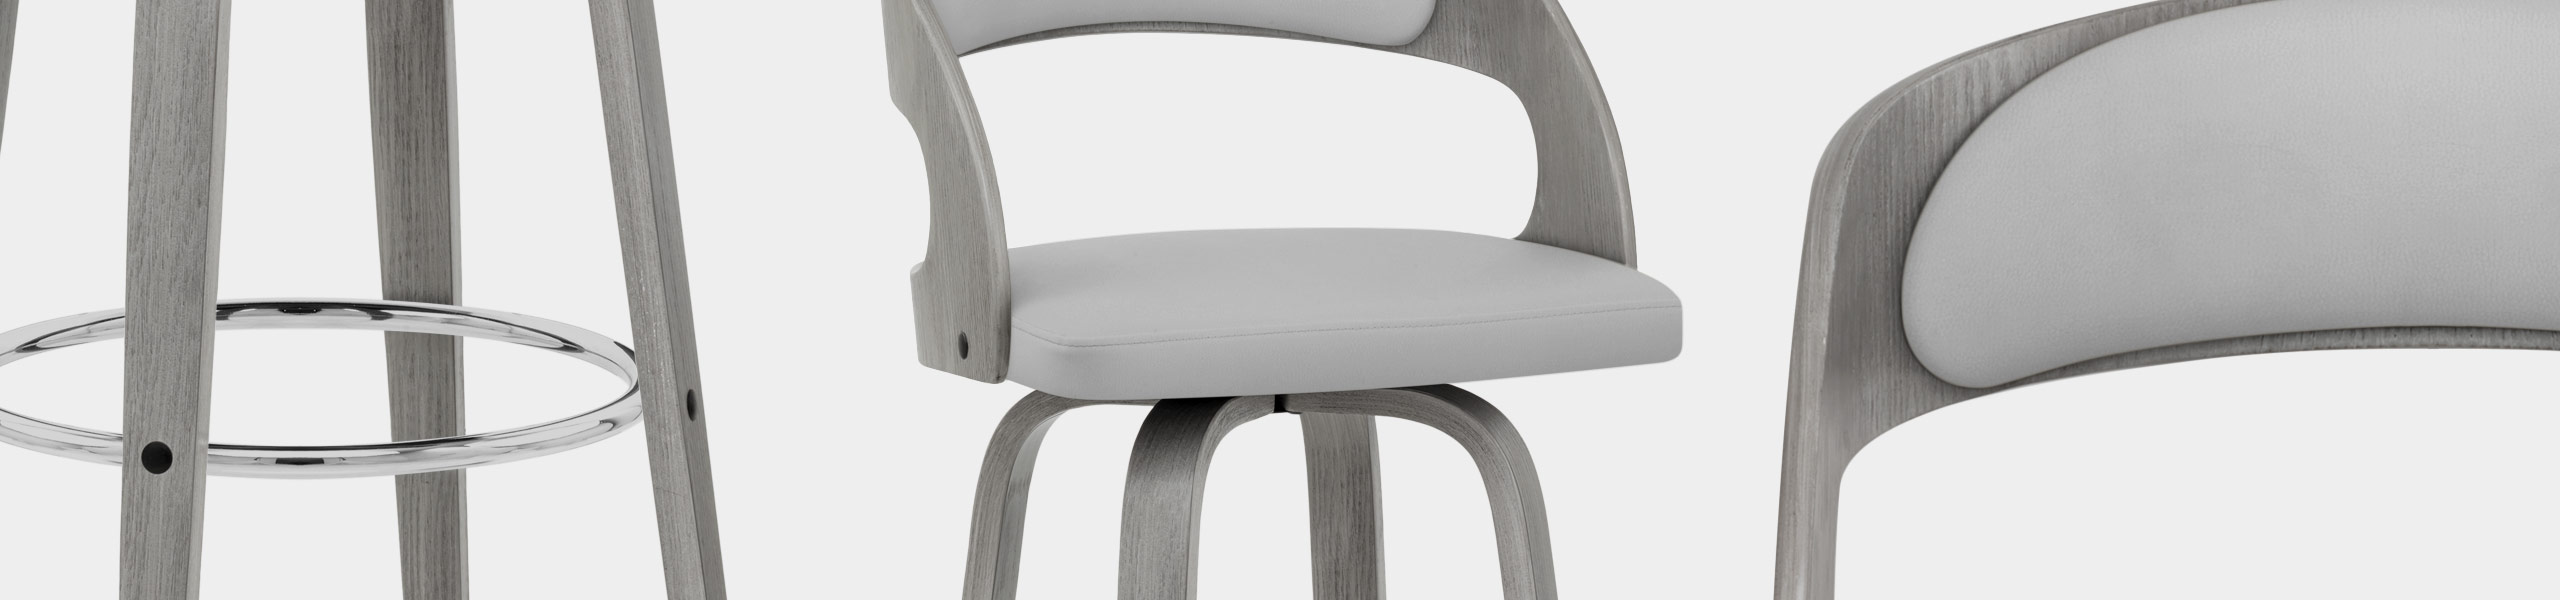 Alicia Grey Wooden Stool Video Banner